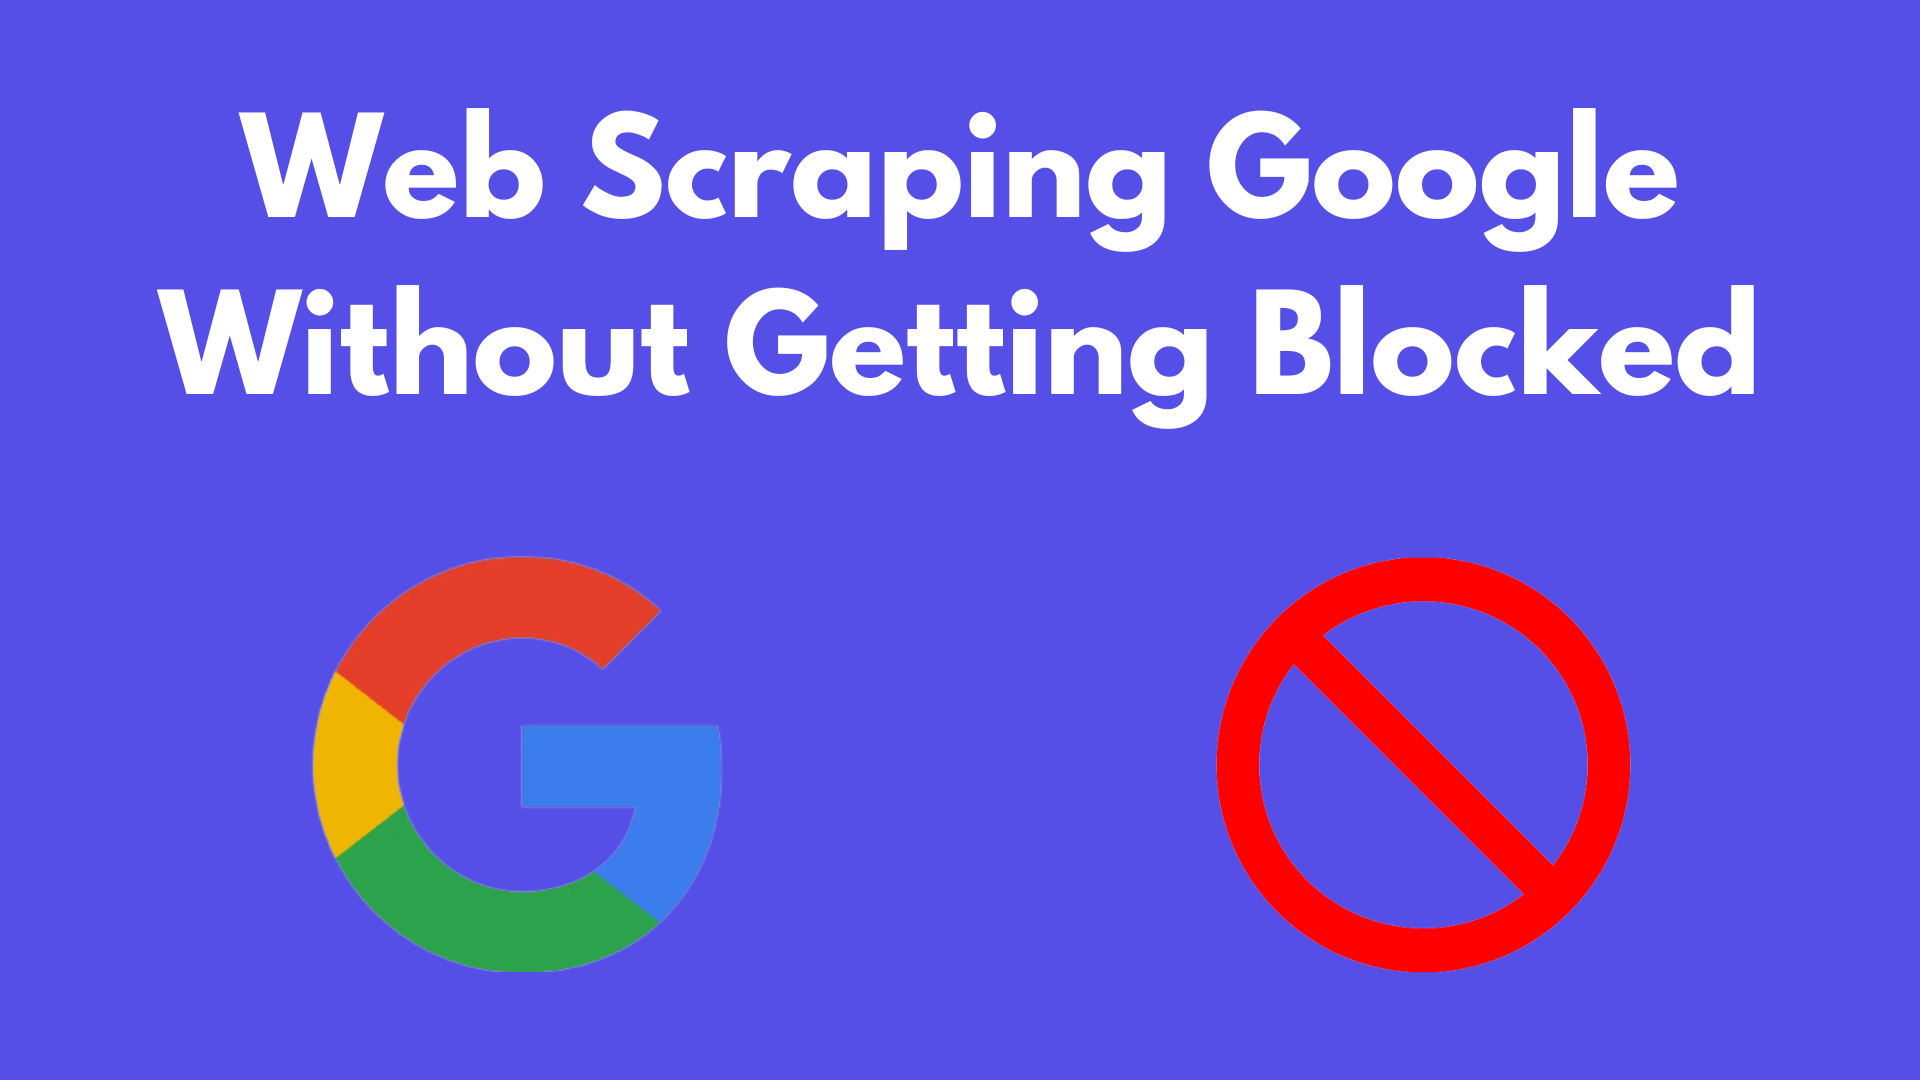 Web Scraping Google Without Getting Blocked